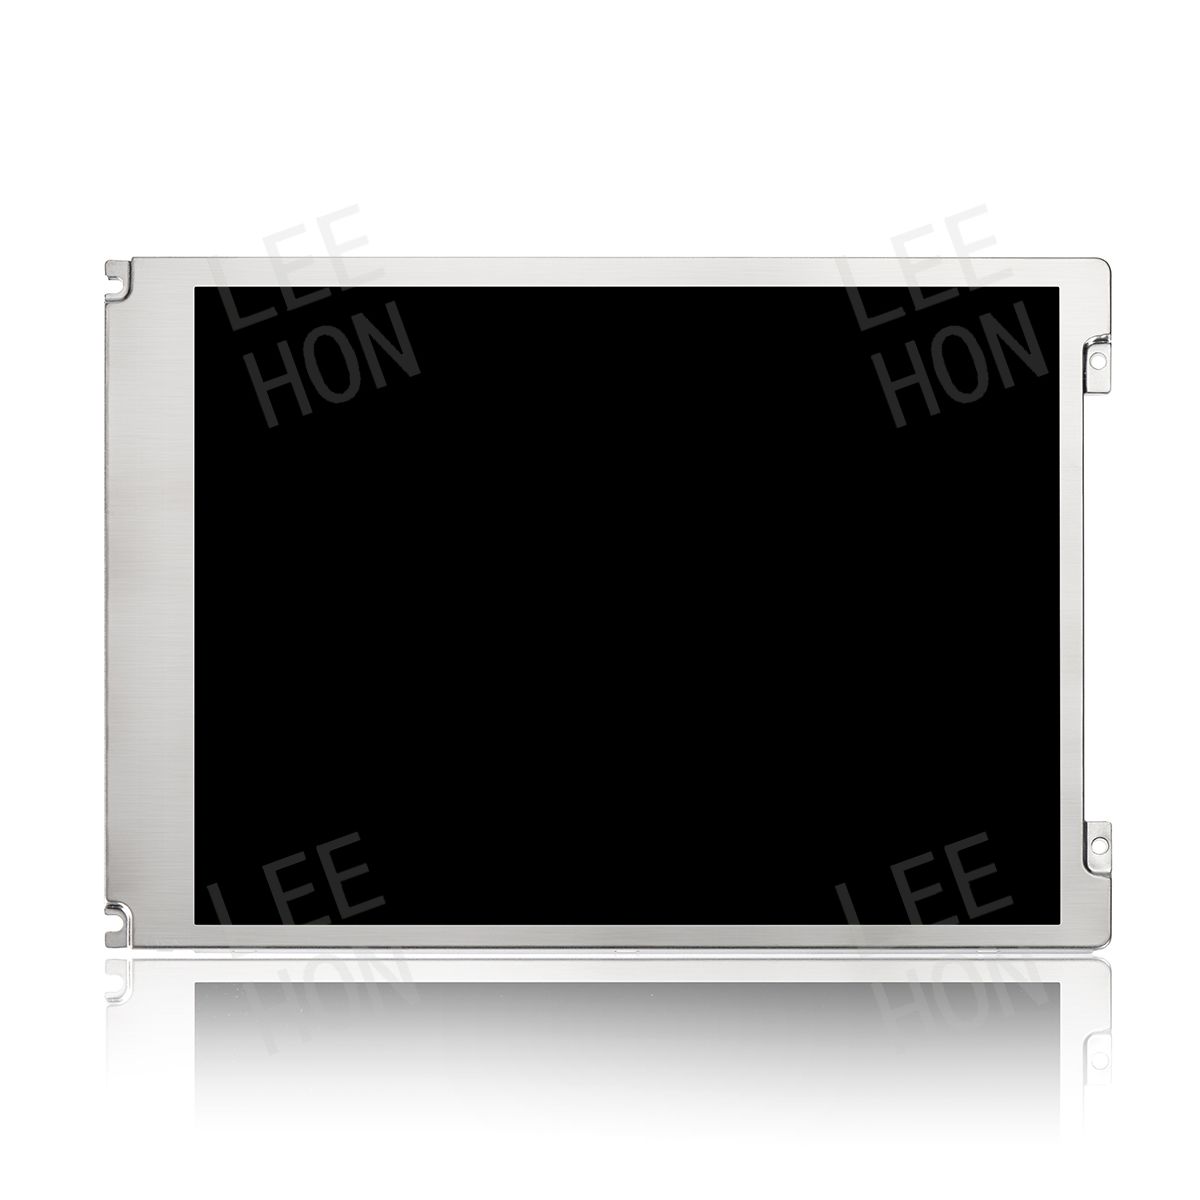 AUO 8.4 inch 800x600 TFT LCD Screen G084SN05 V904 with 20 pin LVDS interface